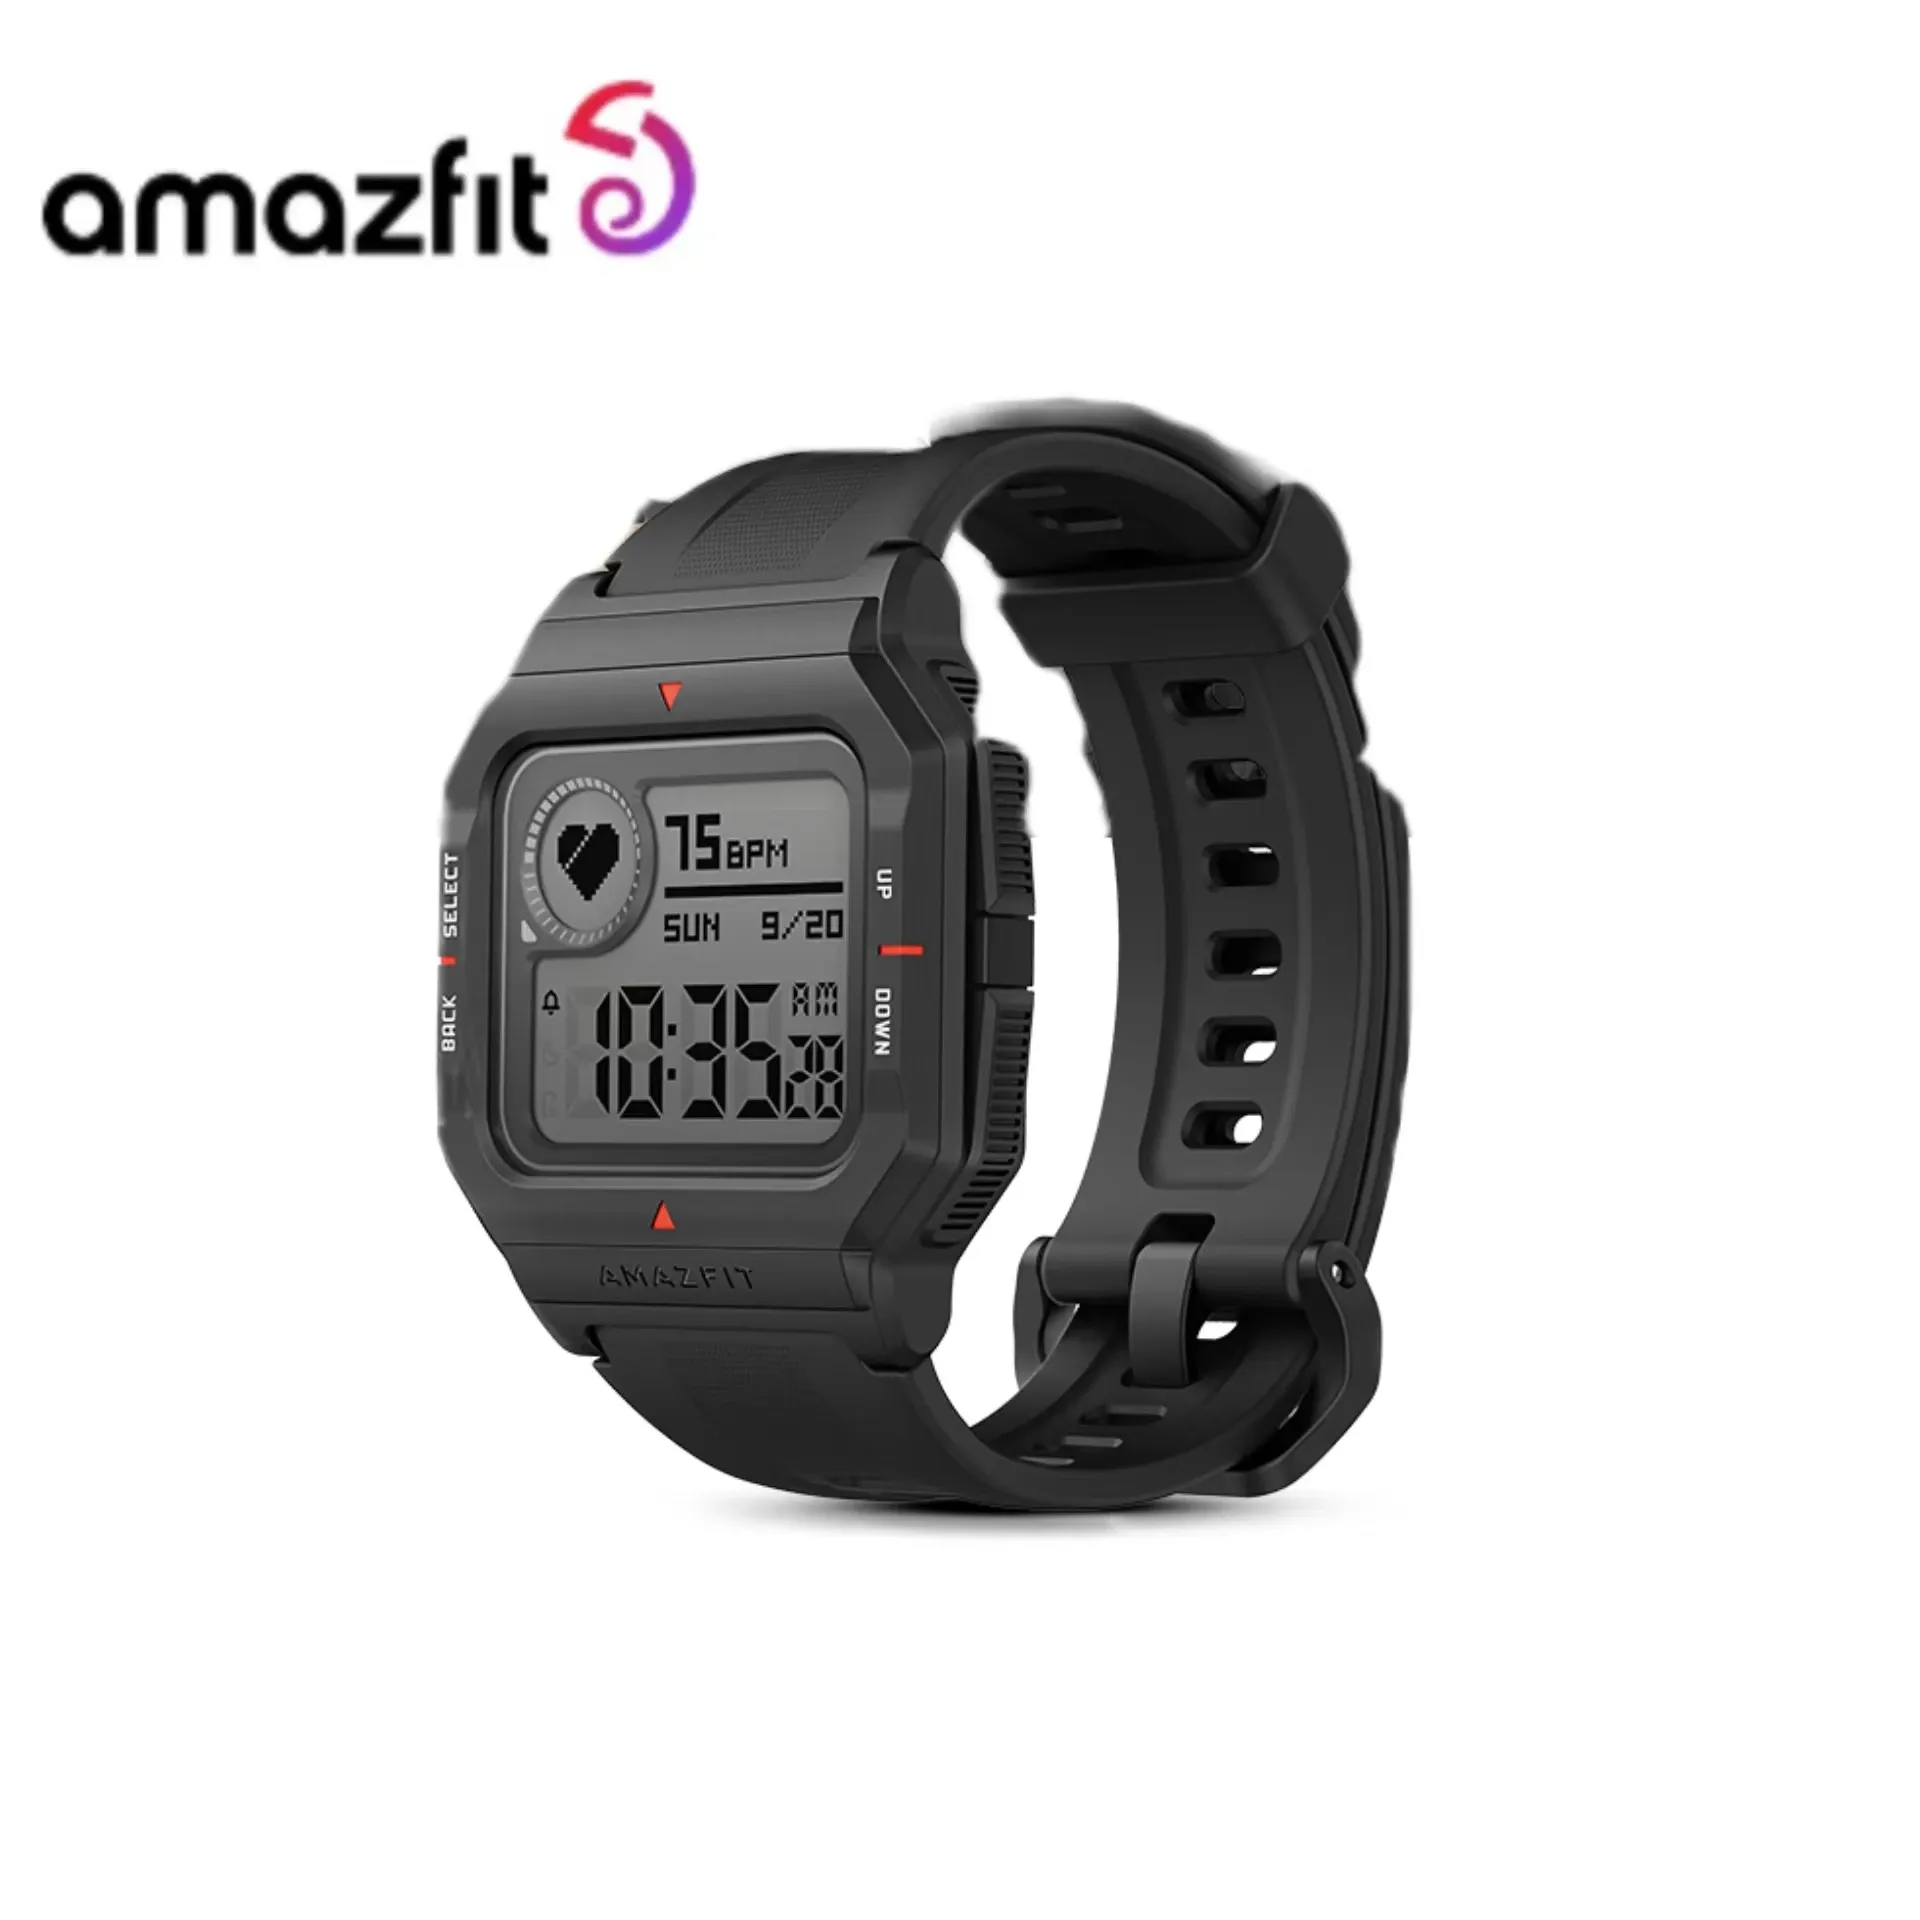 Watches Amazfit Neo Smartwatch STN Display 5atm Waterproof Sports Watch Heart Rise Tracking Bluetooth Låg pris Clearancelow Price CLE